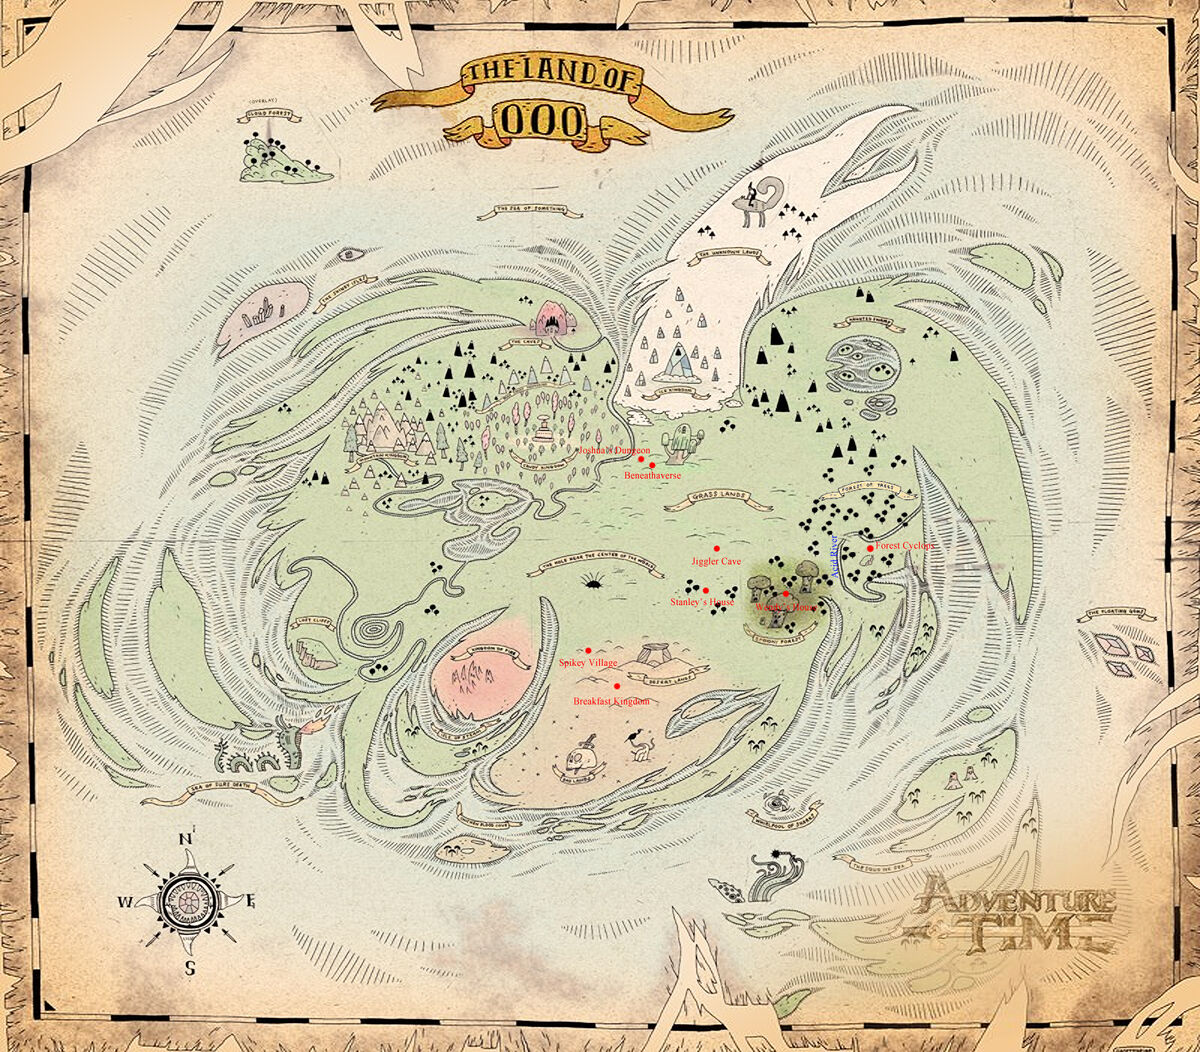 User a Complete Map of Ooo? | Adventure Time Wiki | Fandom